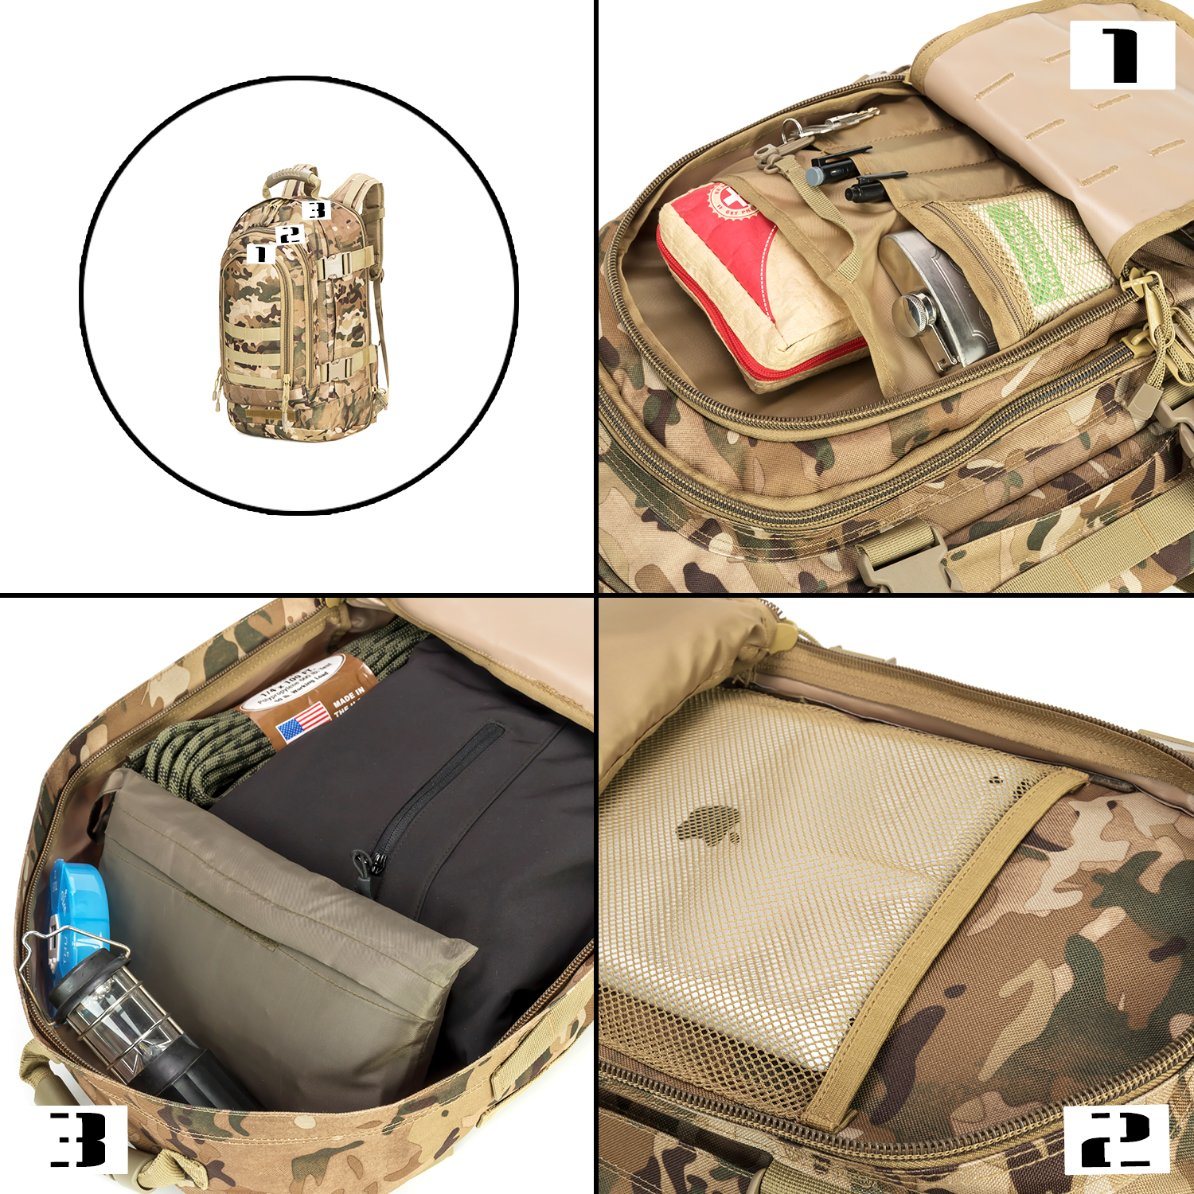 Newest Outdoor Sports Camping Military Tactical Waterproof Large Capacity USB Backpack